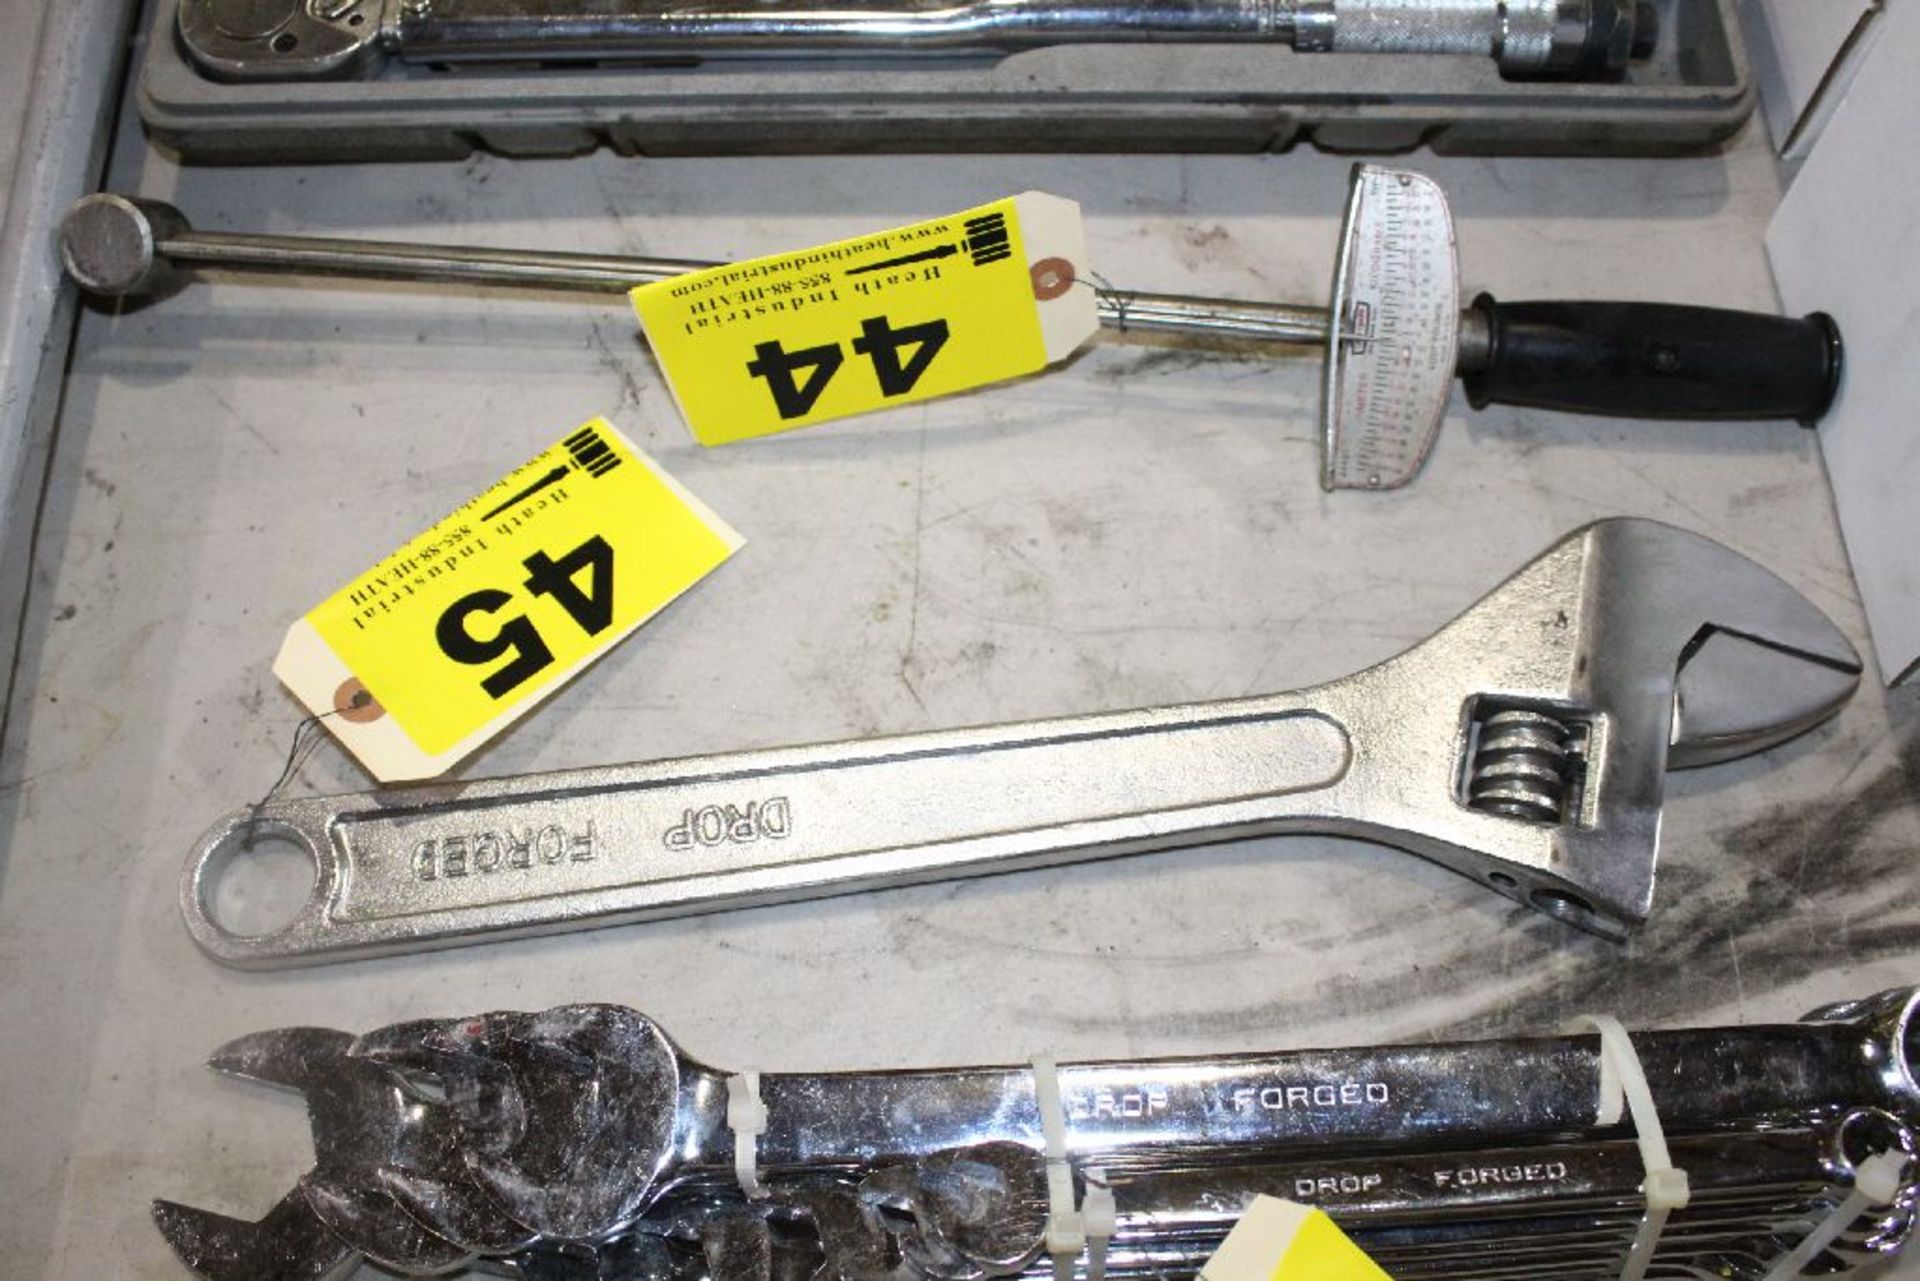 18" LARGE ADJUSTABLE WRENCH